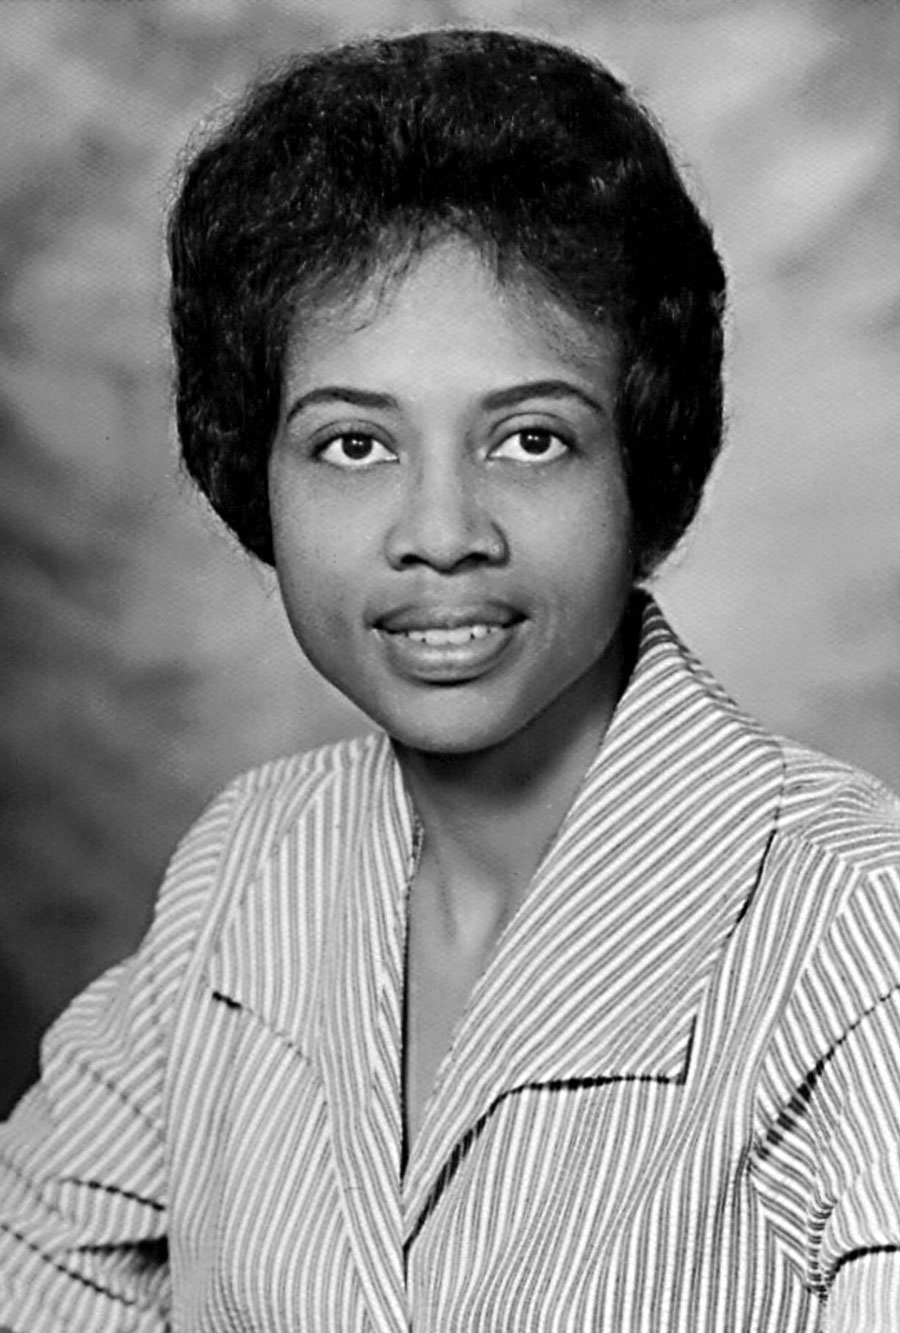 Baylor's first full-time Black faculty member, the late Dr. Vivienne Malone-Mayes, taught mathematics in the College of Arts & Sciences from 1966 to 1994. She was honored by Baylor in 2019 with the installation a large bronze bust and a display featuring her life and career outside the mathematics department offices in the Sid Richardson Building.